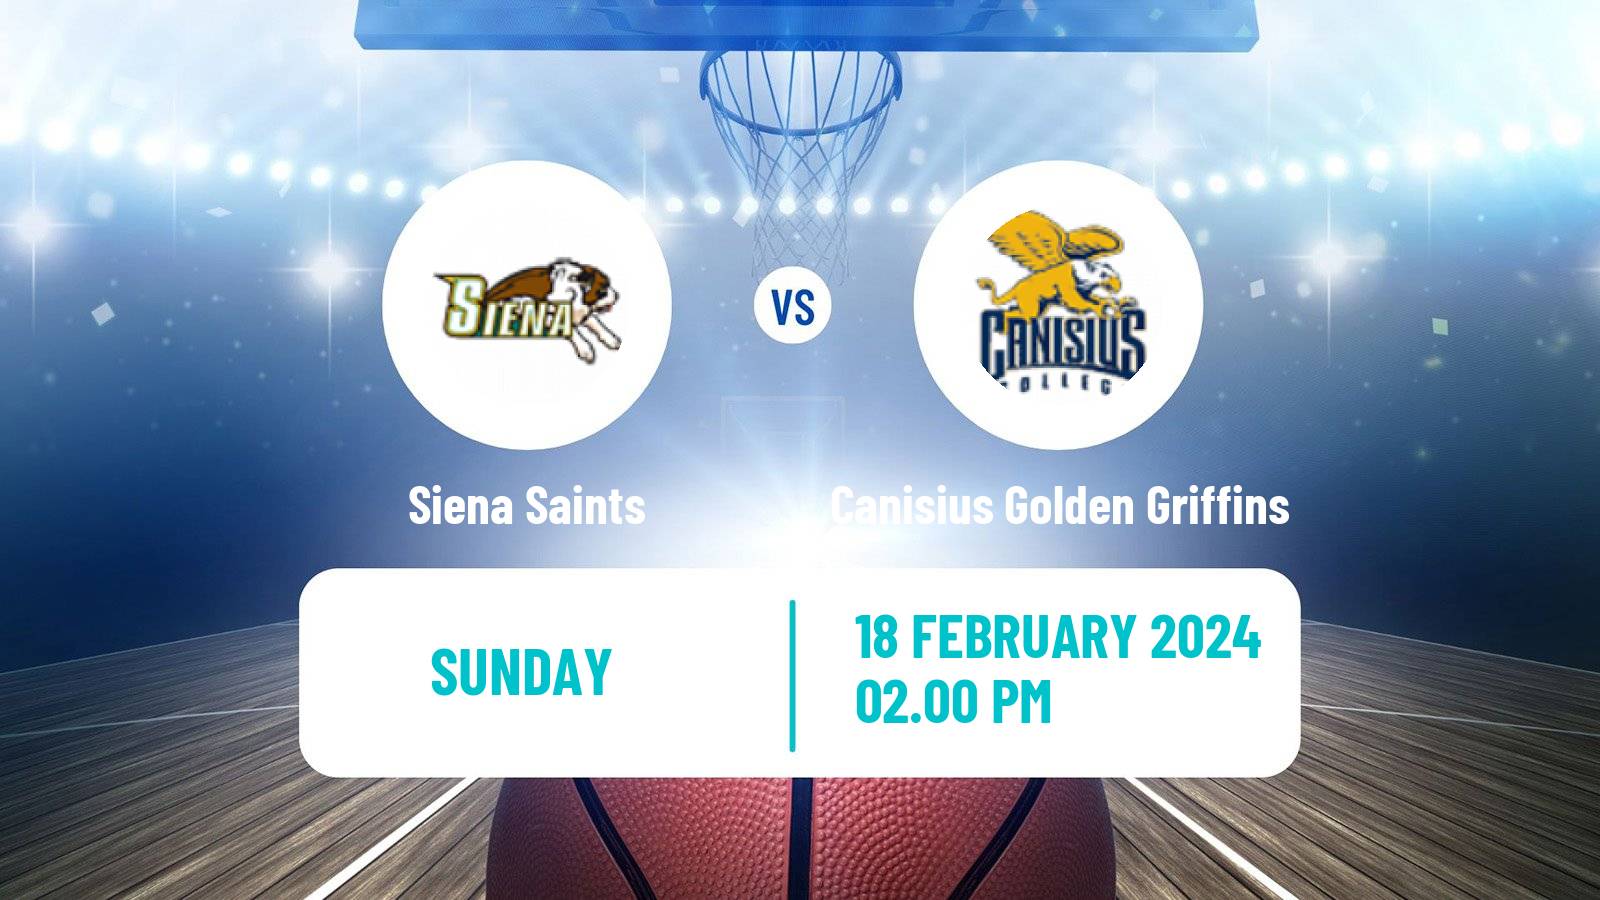 Basketball NCAA College Basketball Siena Saints - Canisius Golden Griffins